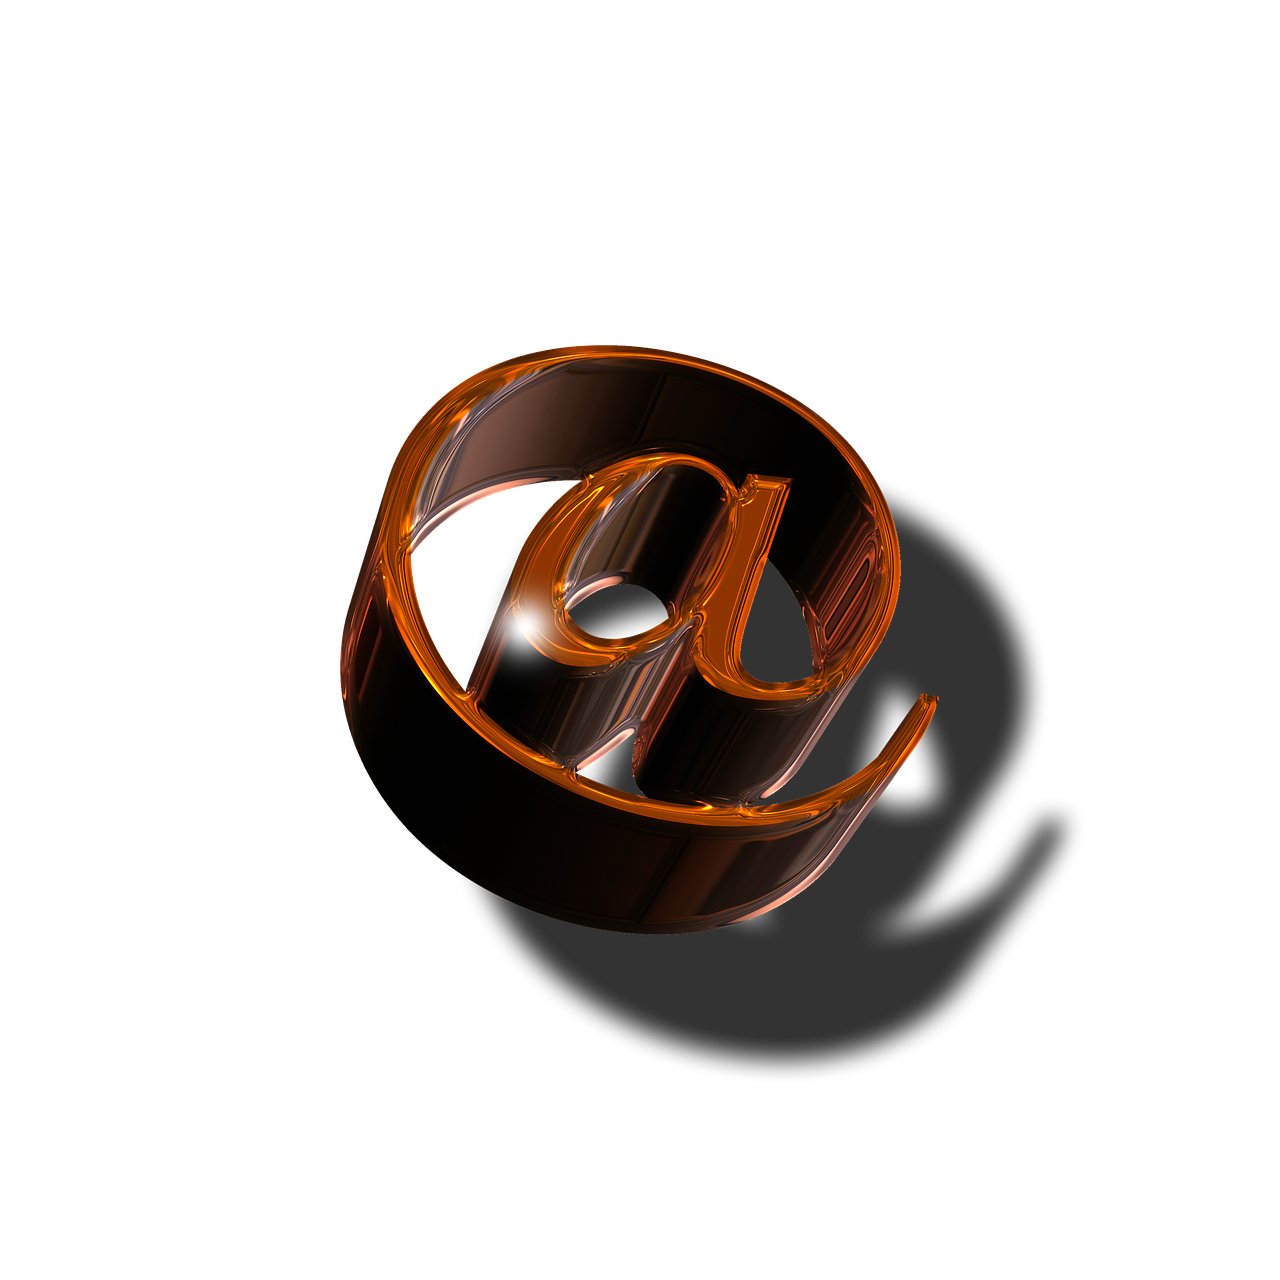 a close up of an email symbol on a black background, by Aleksander Kotsis, zbrush central, computer art, reflections in copper, letter a, amber, 8k octae render photo